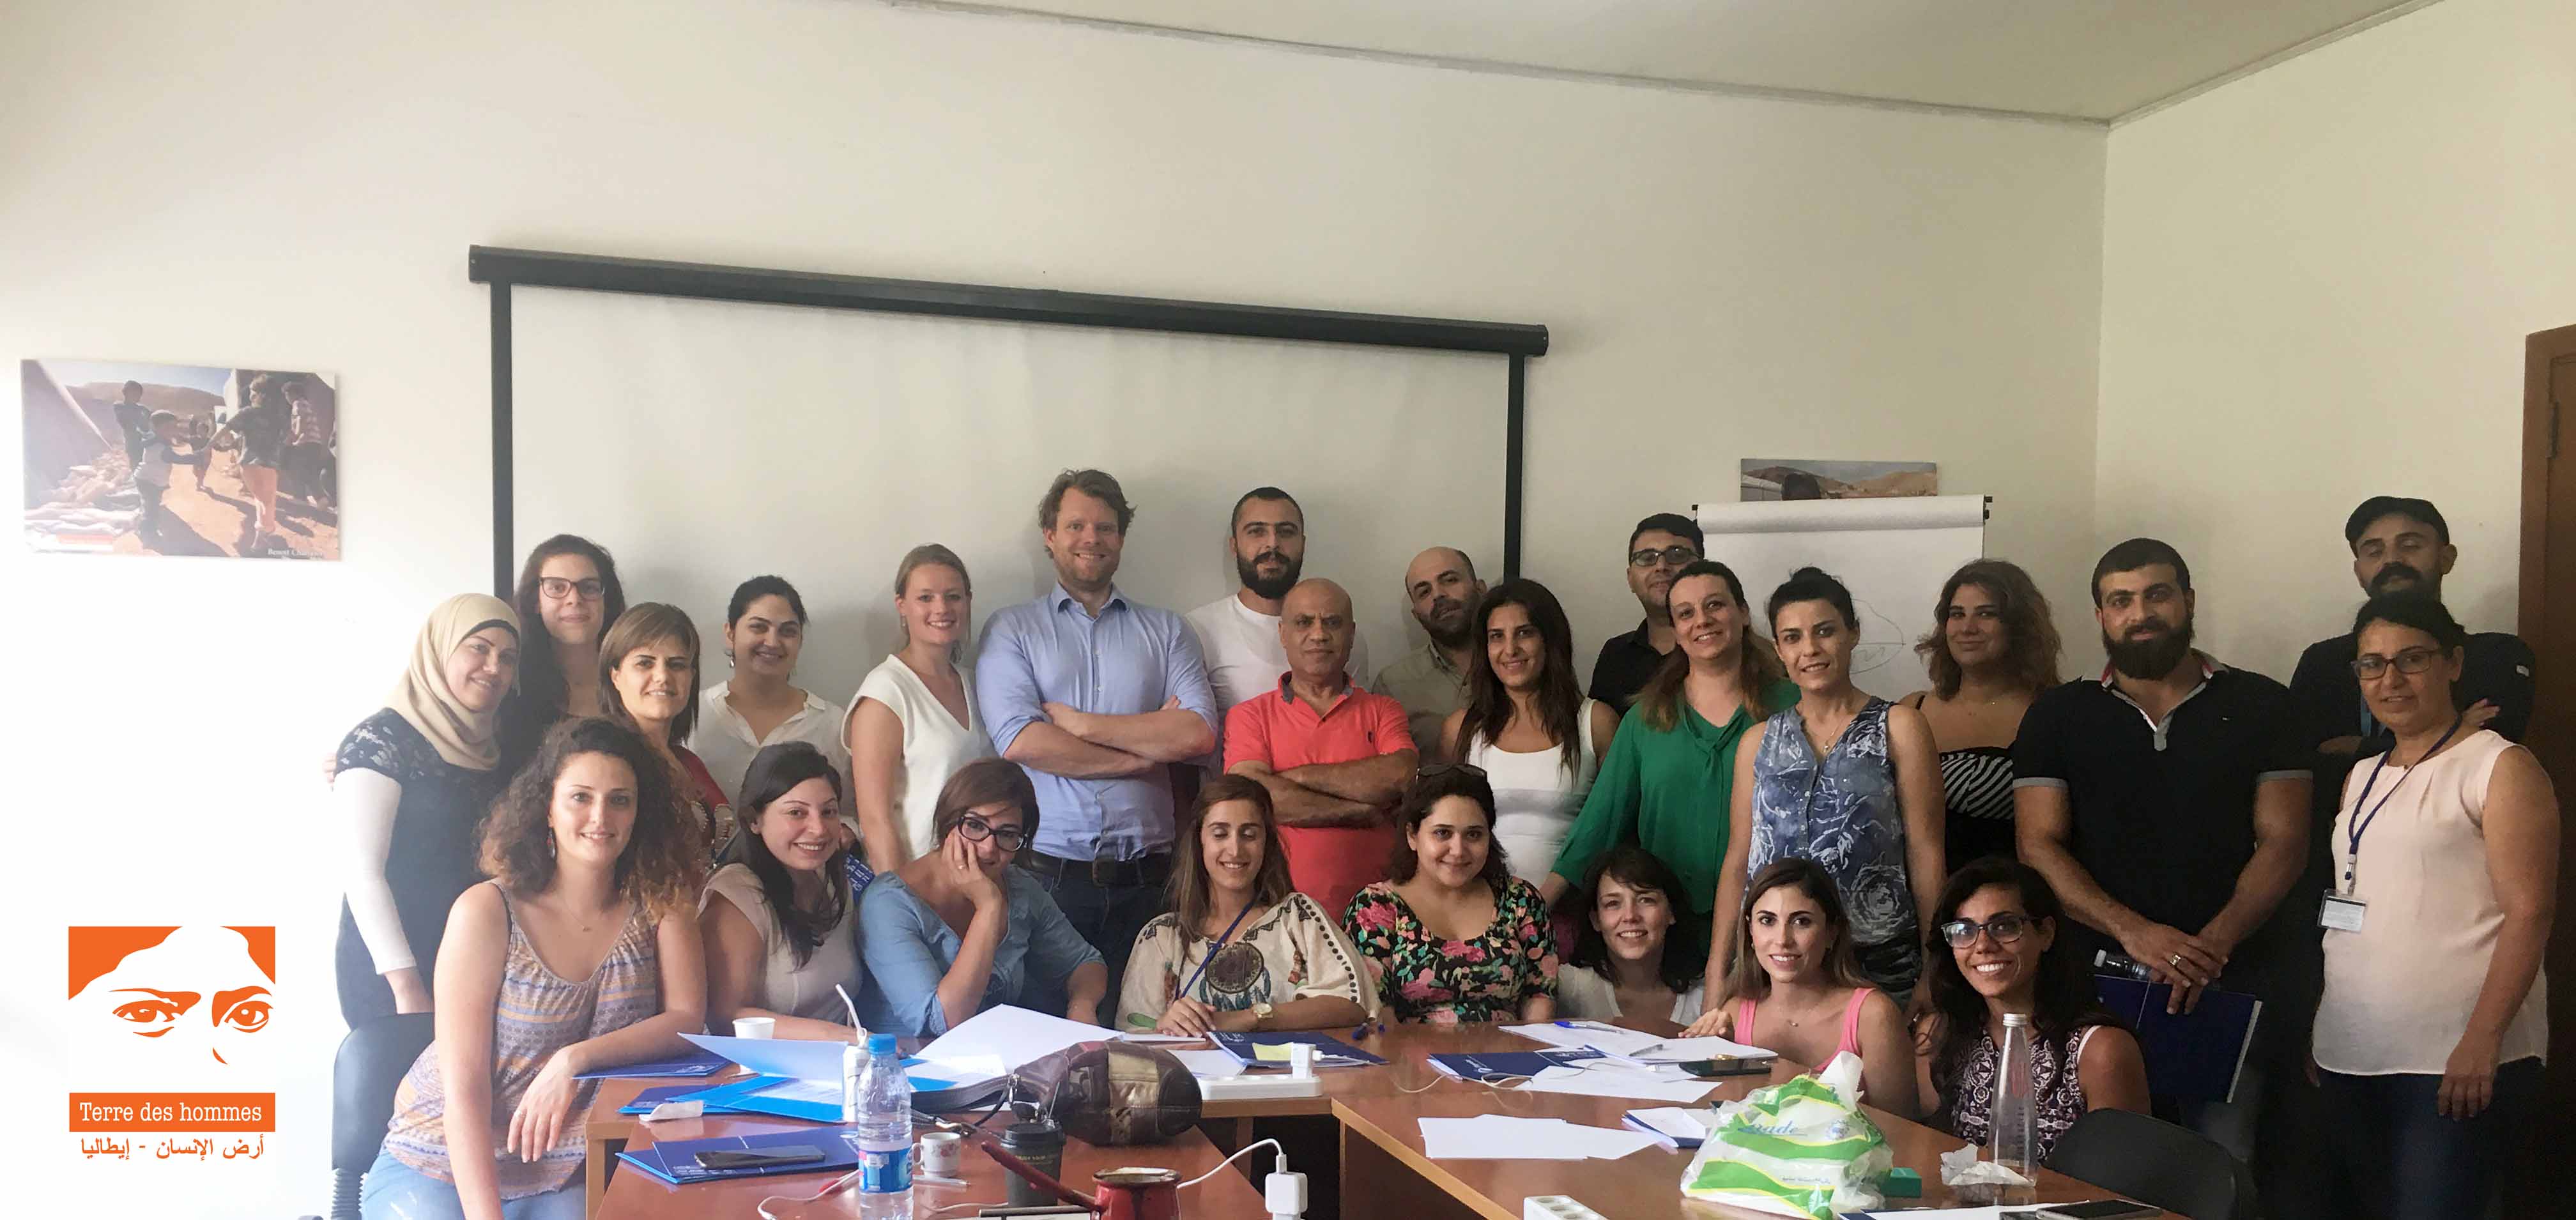 Humanitarian Negotiations Training in Beirut with Terre des Hommes and local partner Nabaa (2 August 2017).